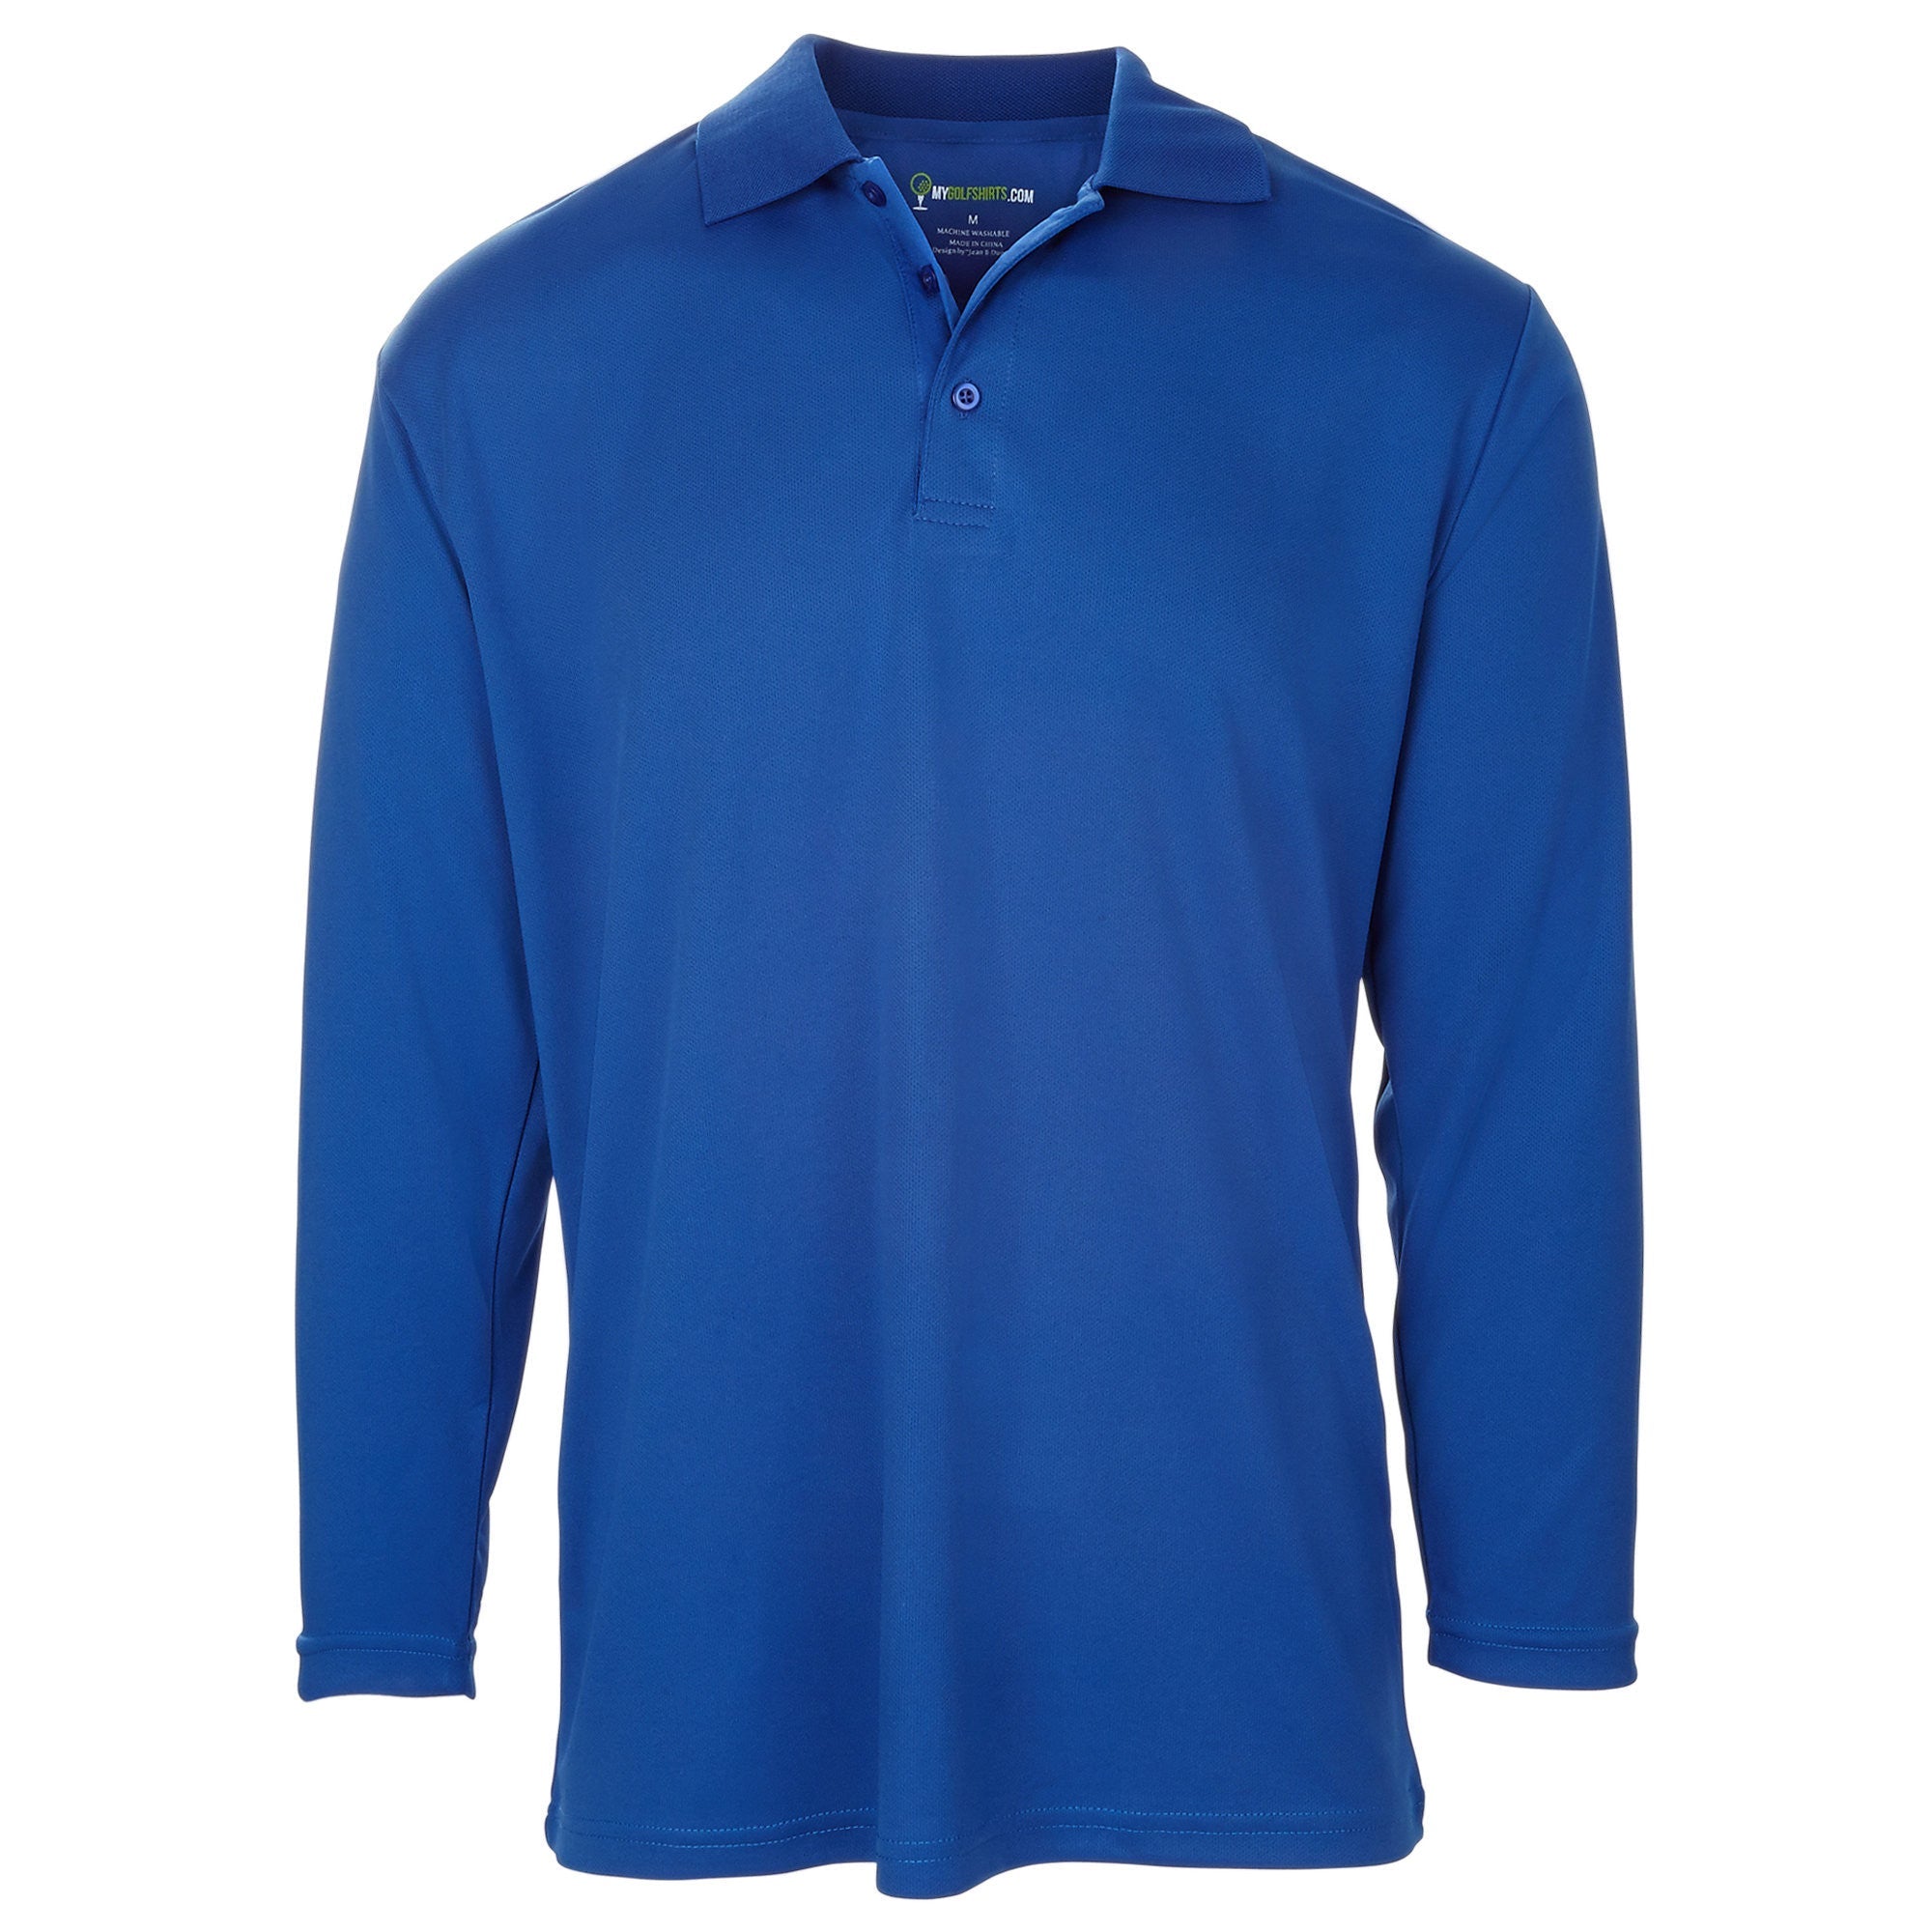 Dri-FIT Golf Shirts - Men’s Long Sleeve Solid - Standard Fit 6002 Long Sleeve Golf Shirt mygolfshirts Small Blue 100 % POLYESTER, DRI-FIT